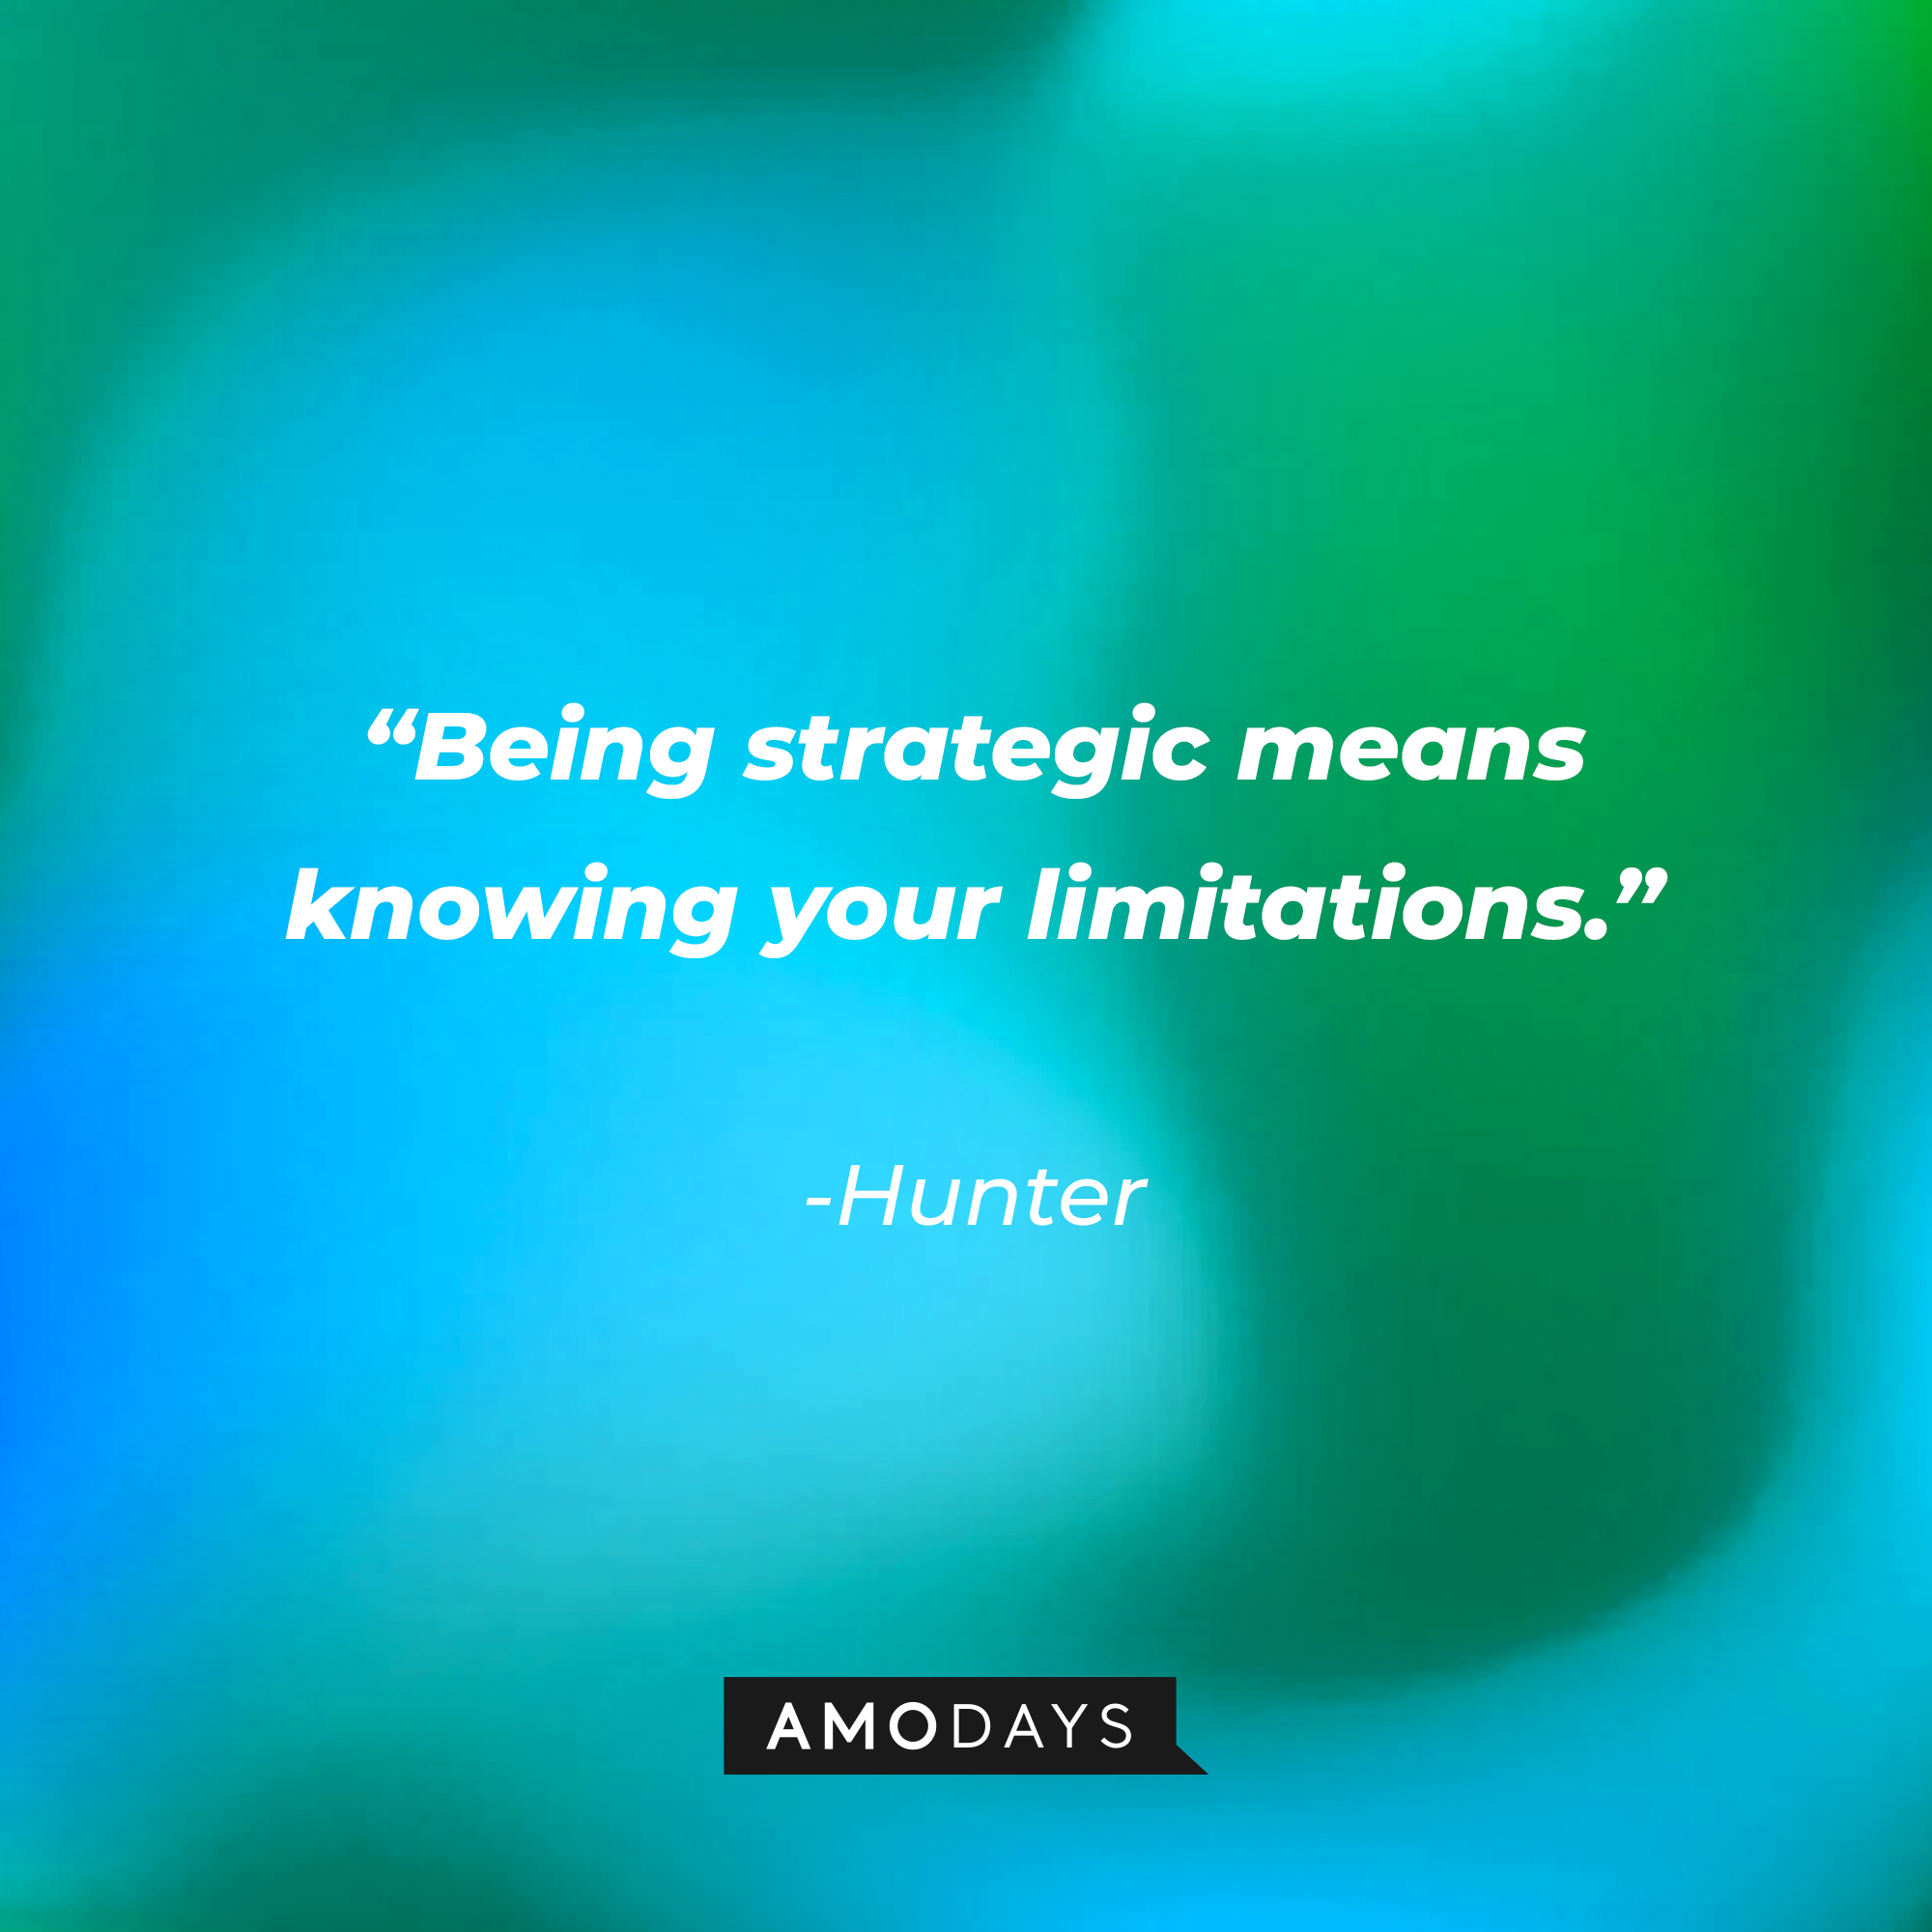 Hunter’s quote: “Being strategic means knowing your limitations.”  | Source: AmoDays